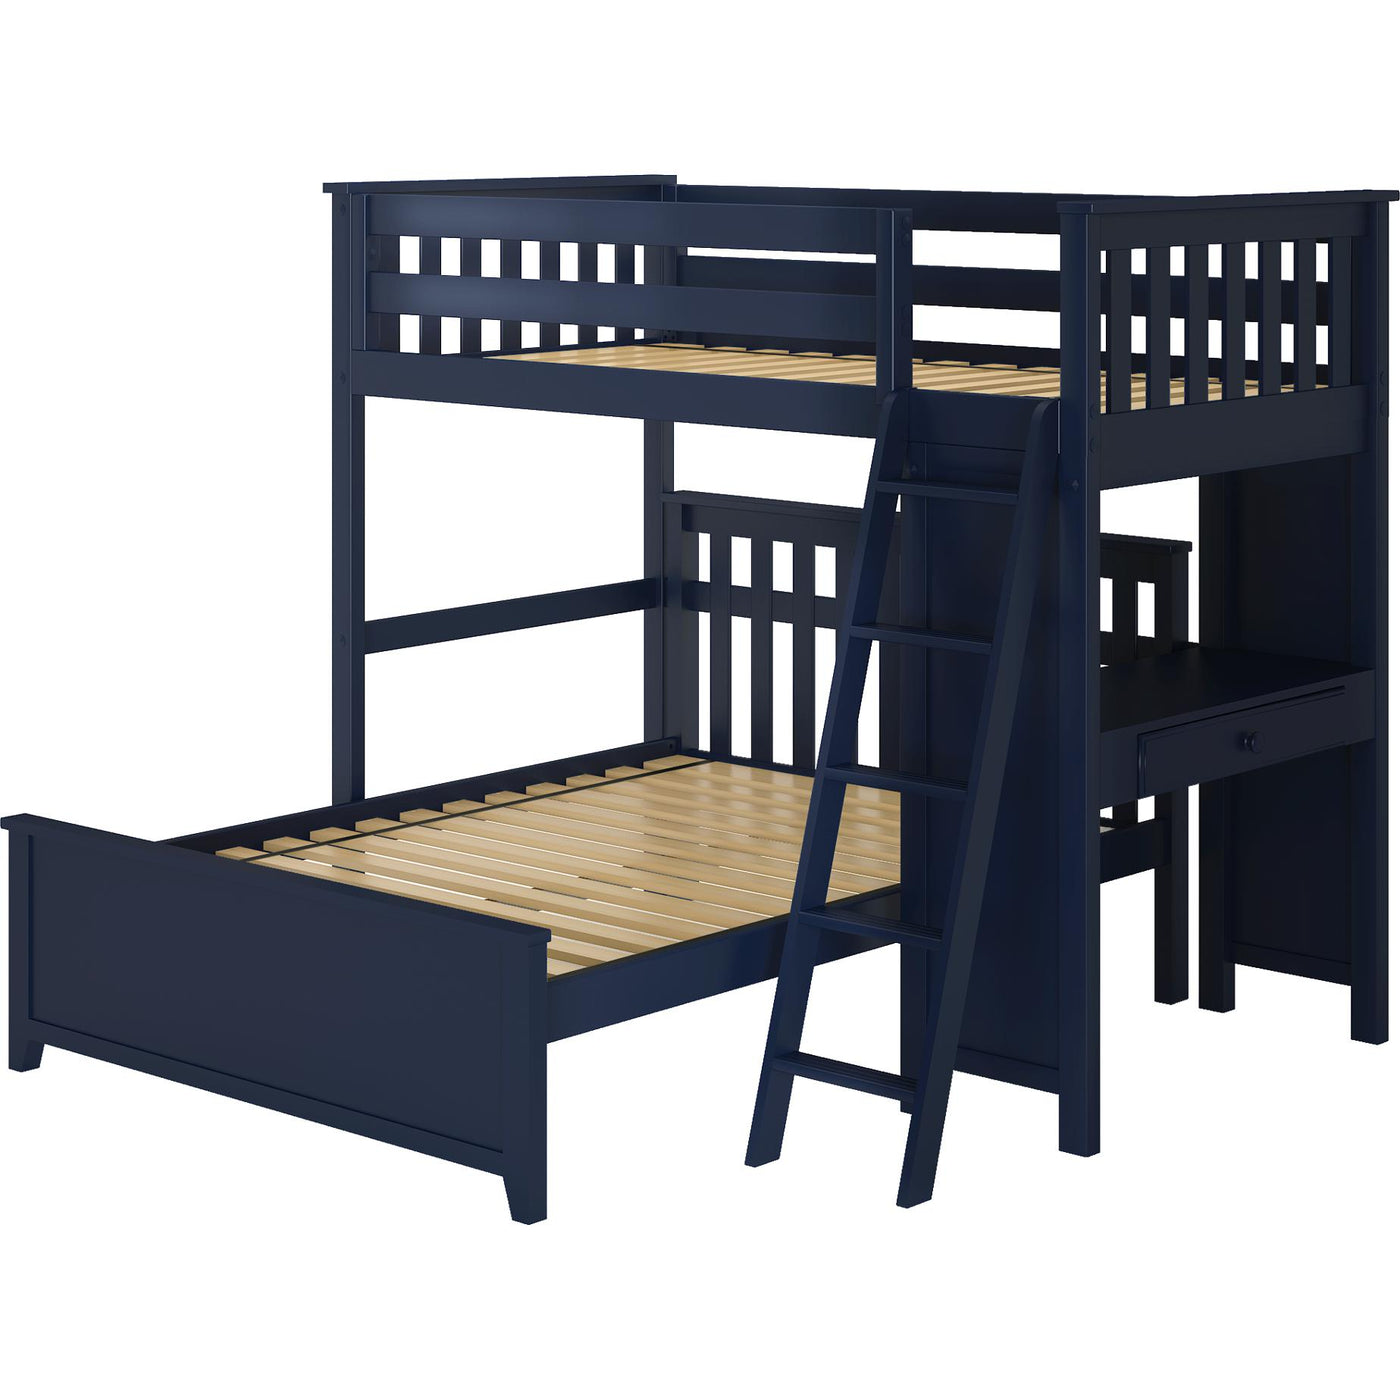 Jackpot Deluxe "CANTEBURY"  Twin Loft Bed Study + Full Bed